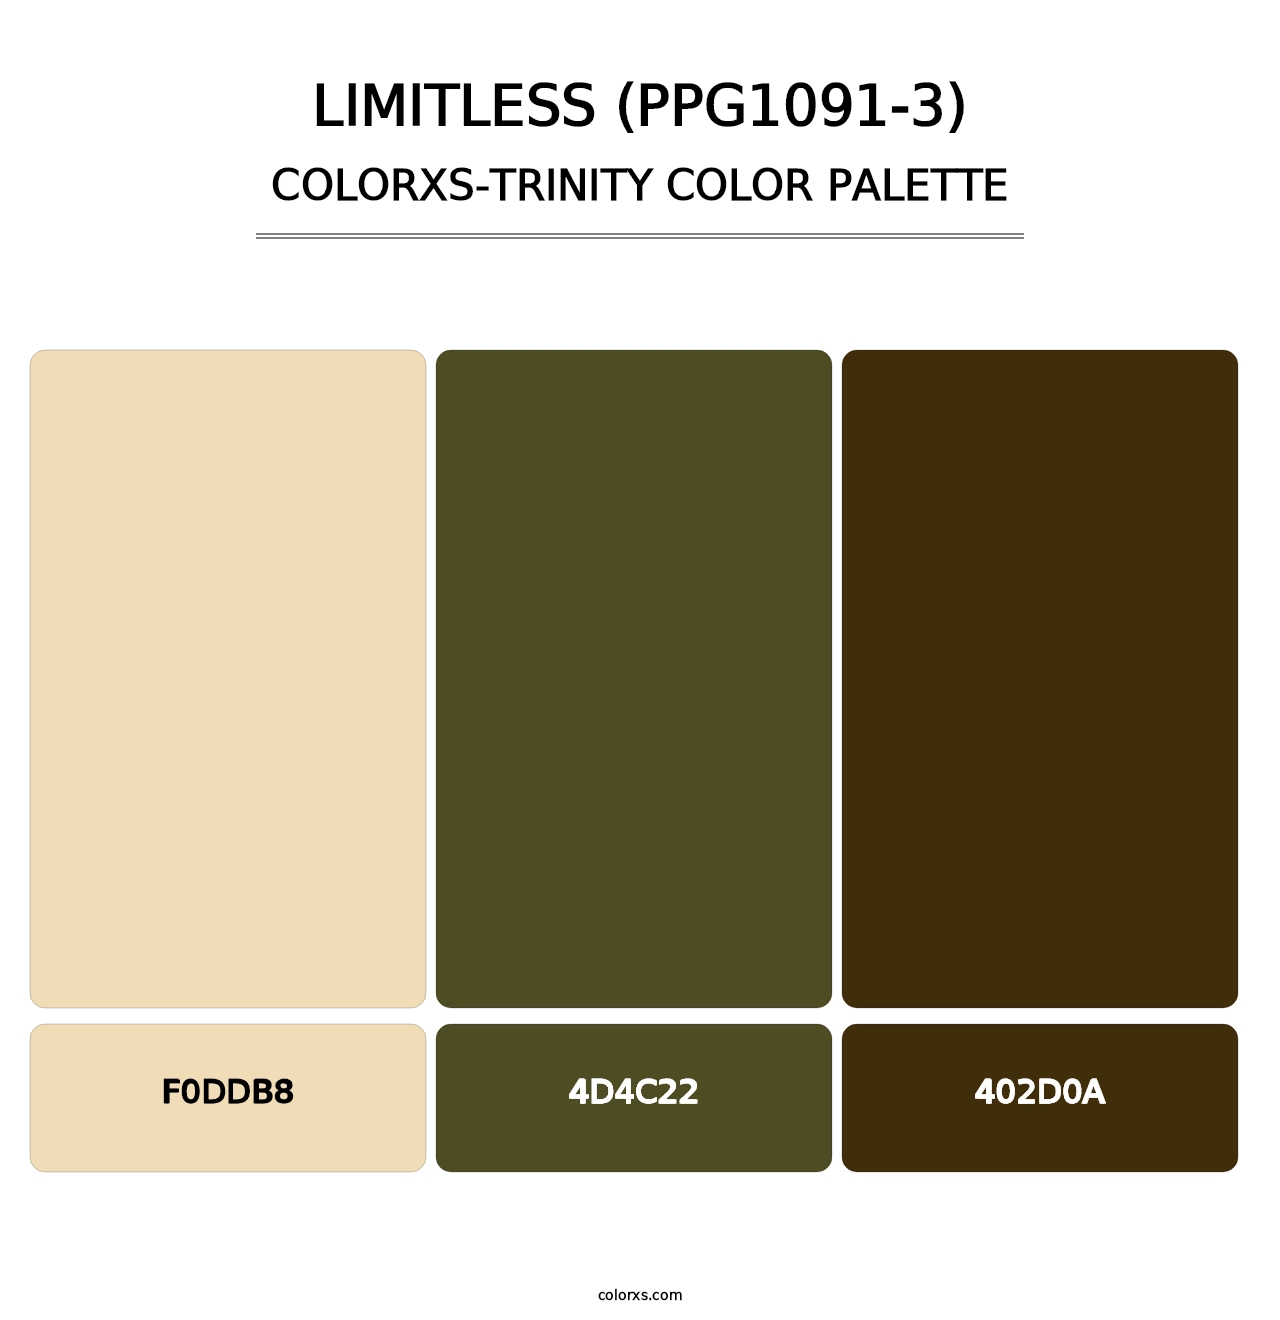 Limitless (PPG1091-3) - Colorxs Trinity Palette